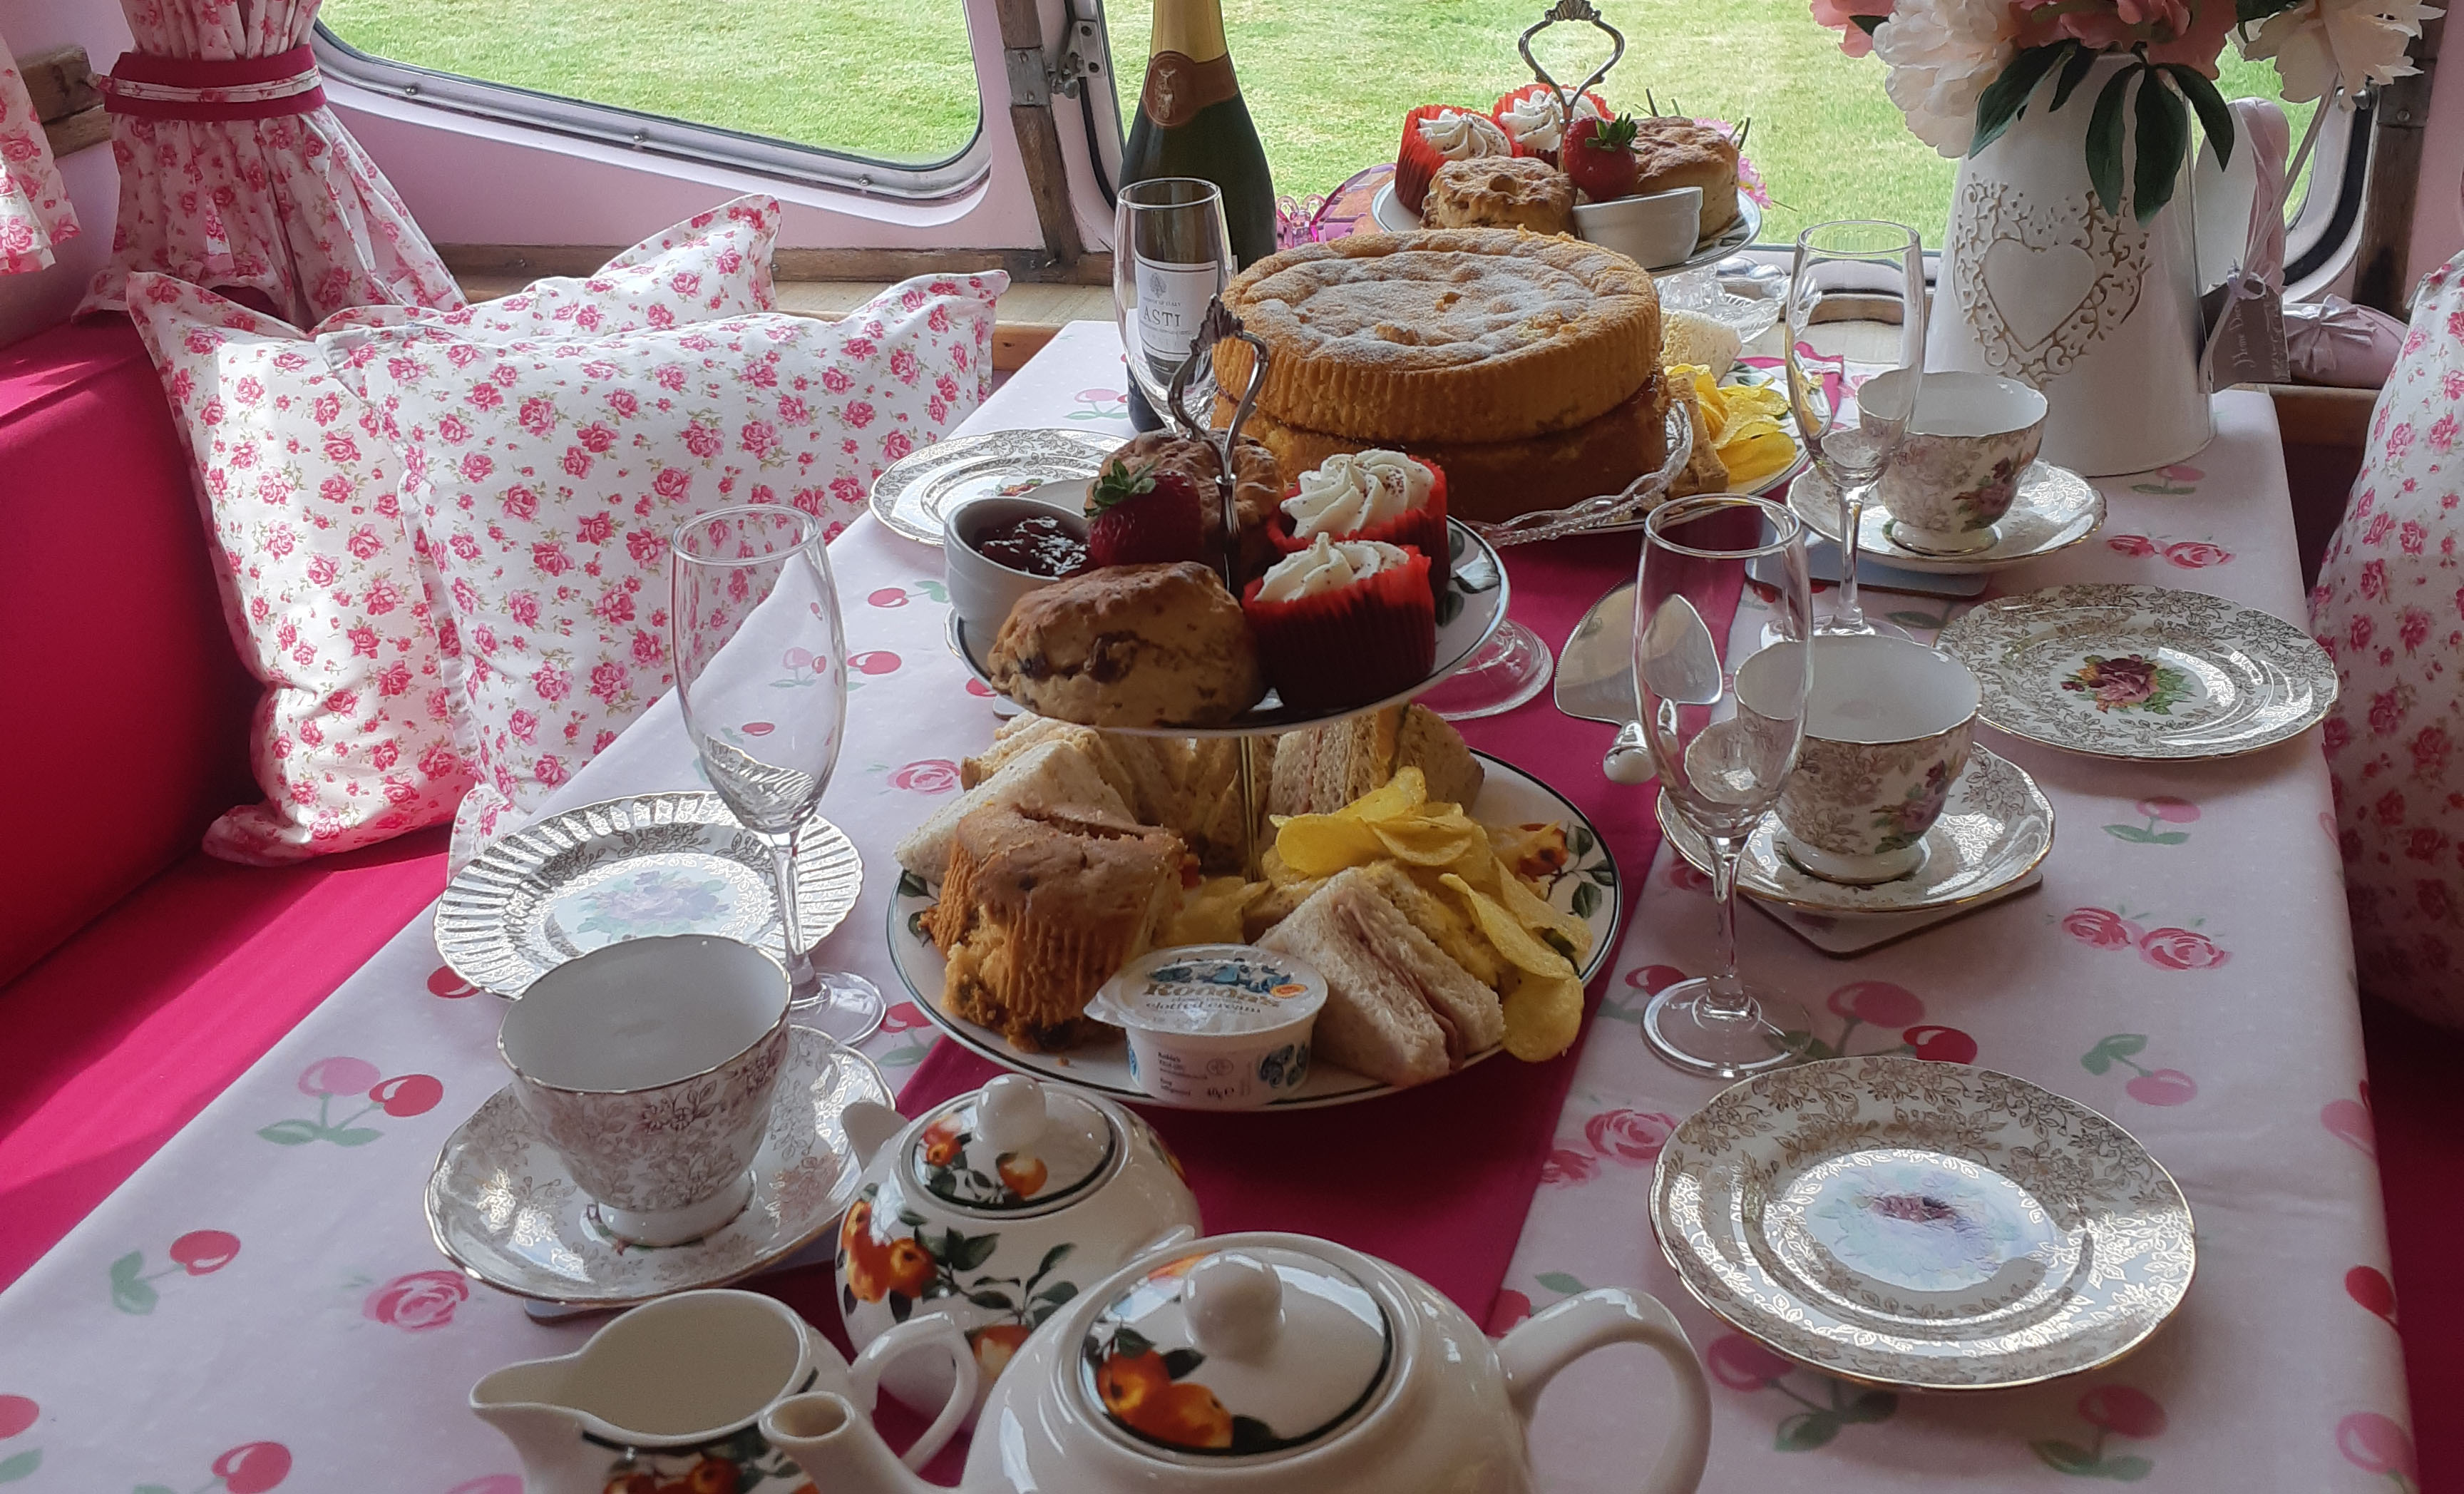 Romany Dreams, Gypsy Wagon, Bed and Breakfast Experience, Afternoon Tea, Kent